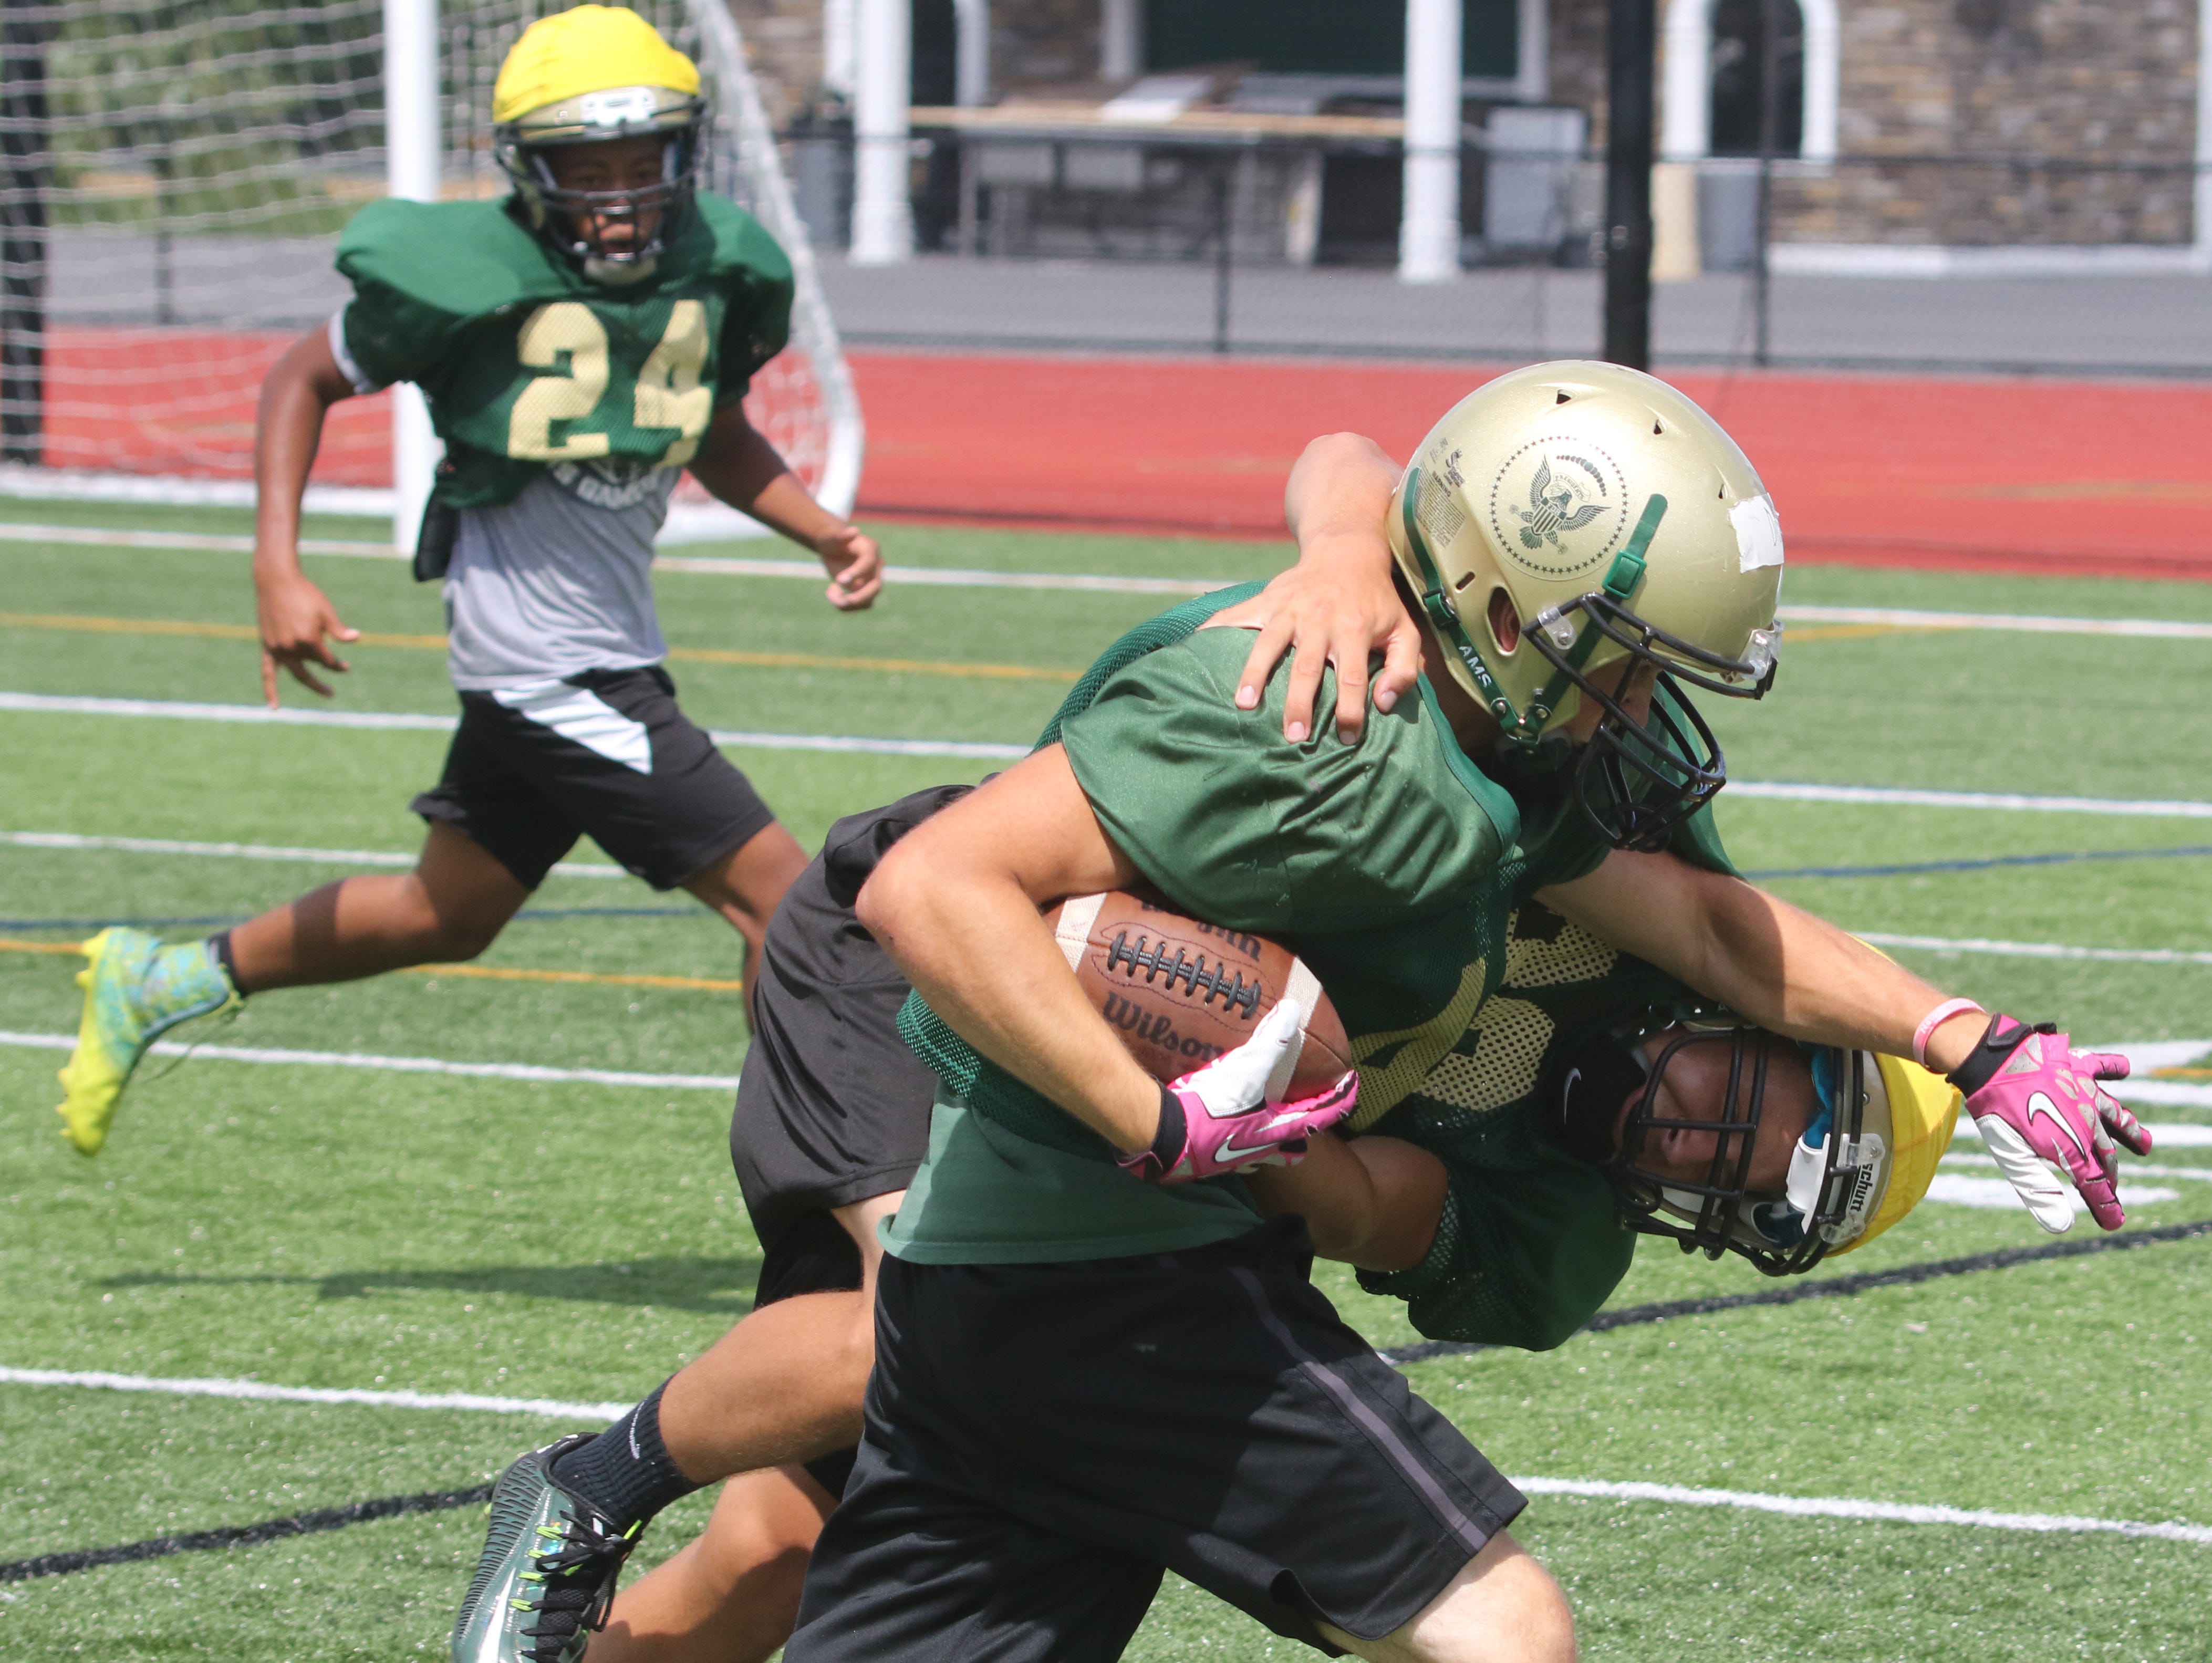 A pair of Franklin D. Roosevelt High School football players get tangled during a preseason practice.